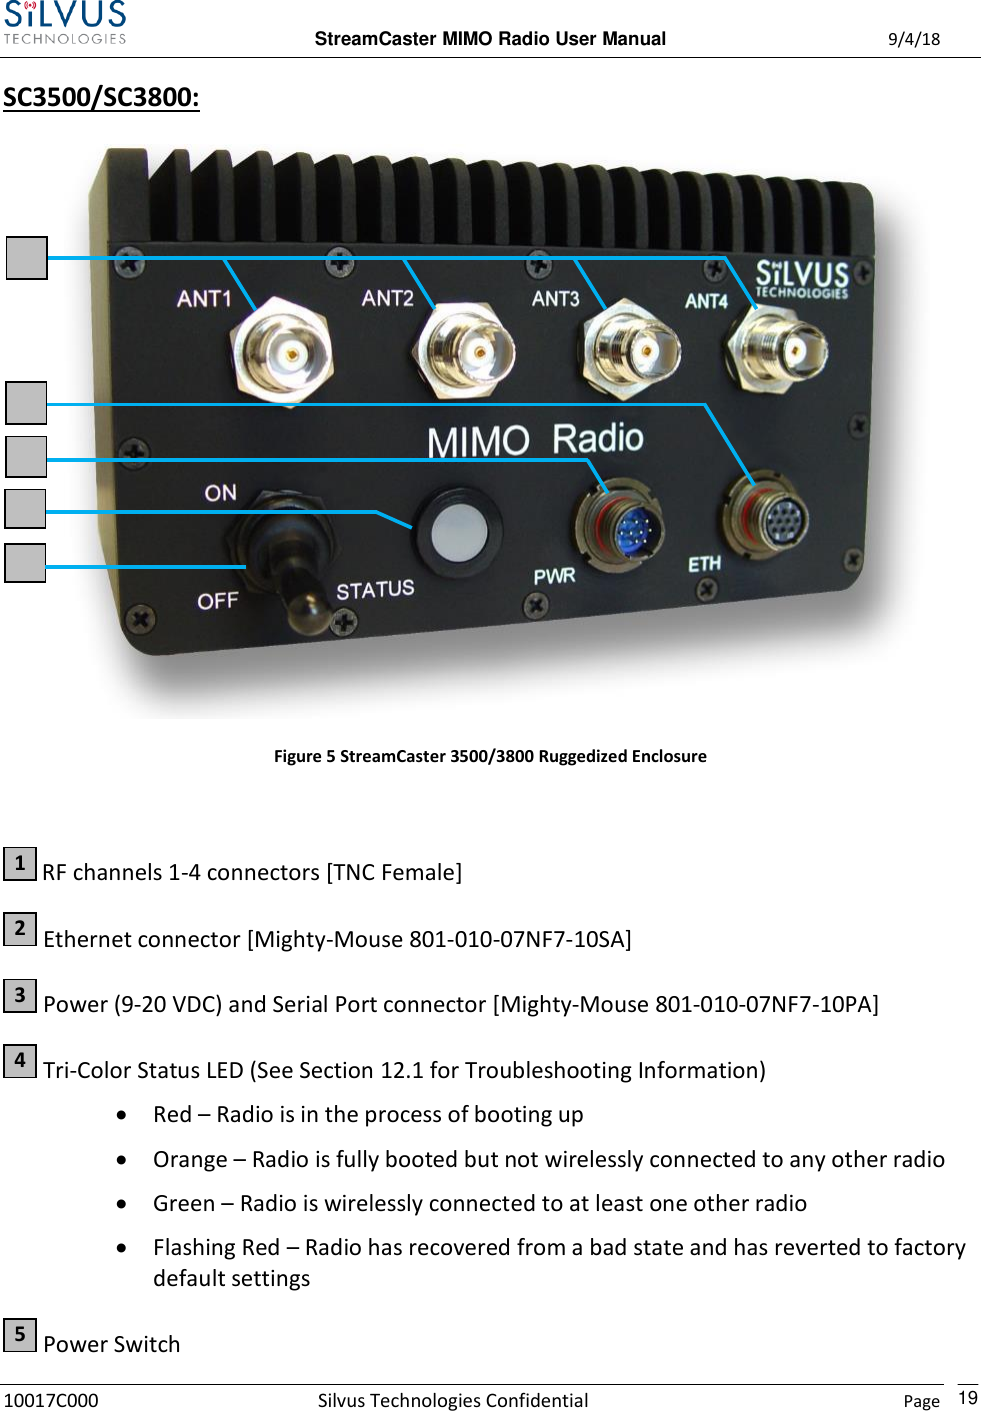  StreamCaster MIMO Radio User Manual  9/4/18 10017C000 Silvus Technologies Confidential    Page    19 SC3500/SC3800:    Figure 5 StreamCaster 3500/3800 Ruggedized Enclosure   RF channels 1-4 connectors [TNC Female]  Ethernet connector [Mighty-Mouse 801-010-07NF7-10SA]  Power (9-20 VDC) and Serial Port connector [Mighty-Mouse 801-010-07NF7-10PA]  Tri-Color Status LED (See Section 12.1 for Troubleshooting Information)  Red – Radio is in the process of booting up  Orange – Radio is fully booted but not wirelessly connected to any other radio  Green – Radio is wirelessly connected to at least one other radio  Flashing Red – Radio has recovered from a bad state and has reverted to factory default settings  Power Switch 5 4 3 2 1 